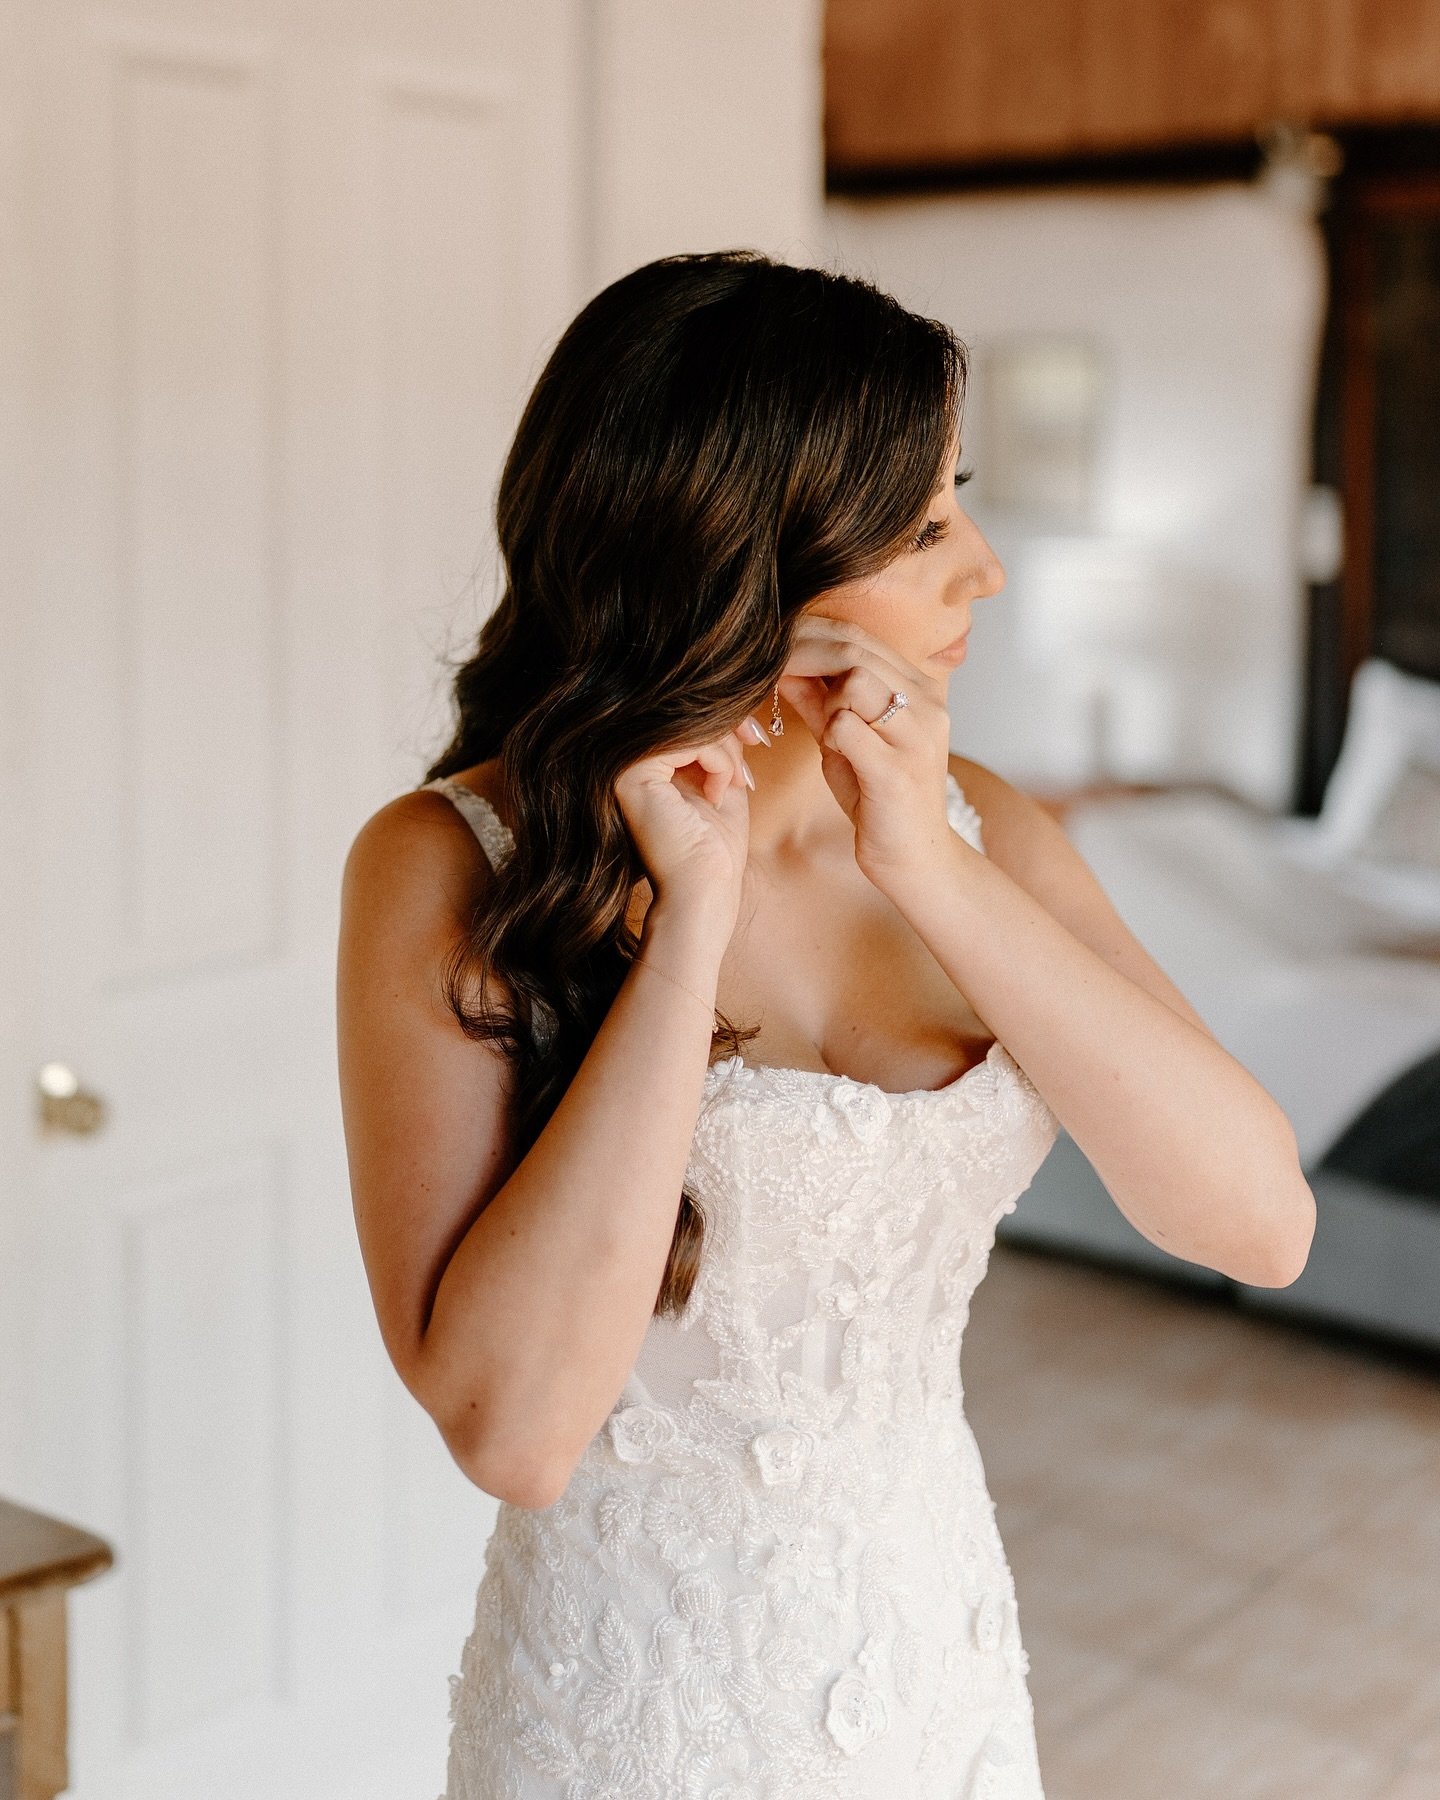 The beautiful Kathleen ✨ coming soon ⁣
⁣
Wedding Venue⁣ @petersonhouseweddings 
Photography⁣ @for_modernromantics 
Videography⁣ @wildwood_cinematic 
Bride Dressed By⁣ @blanchebridal 
Groom Dressed By @mjbale 
Hair &amp; Makeup @airlieandco 
MC⁣ @theh